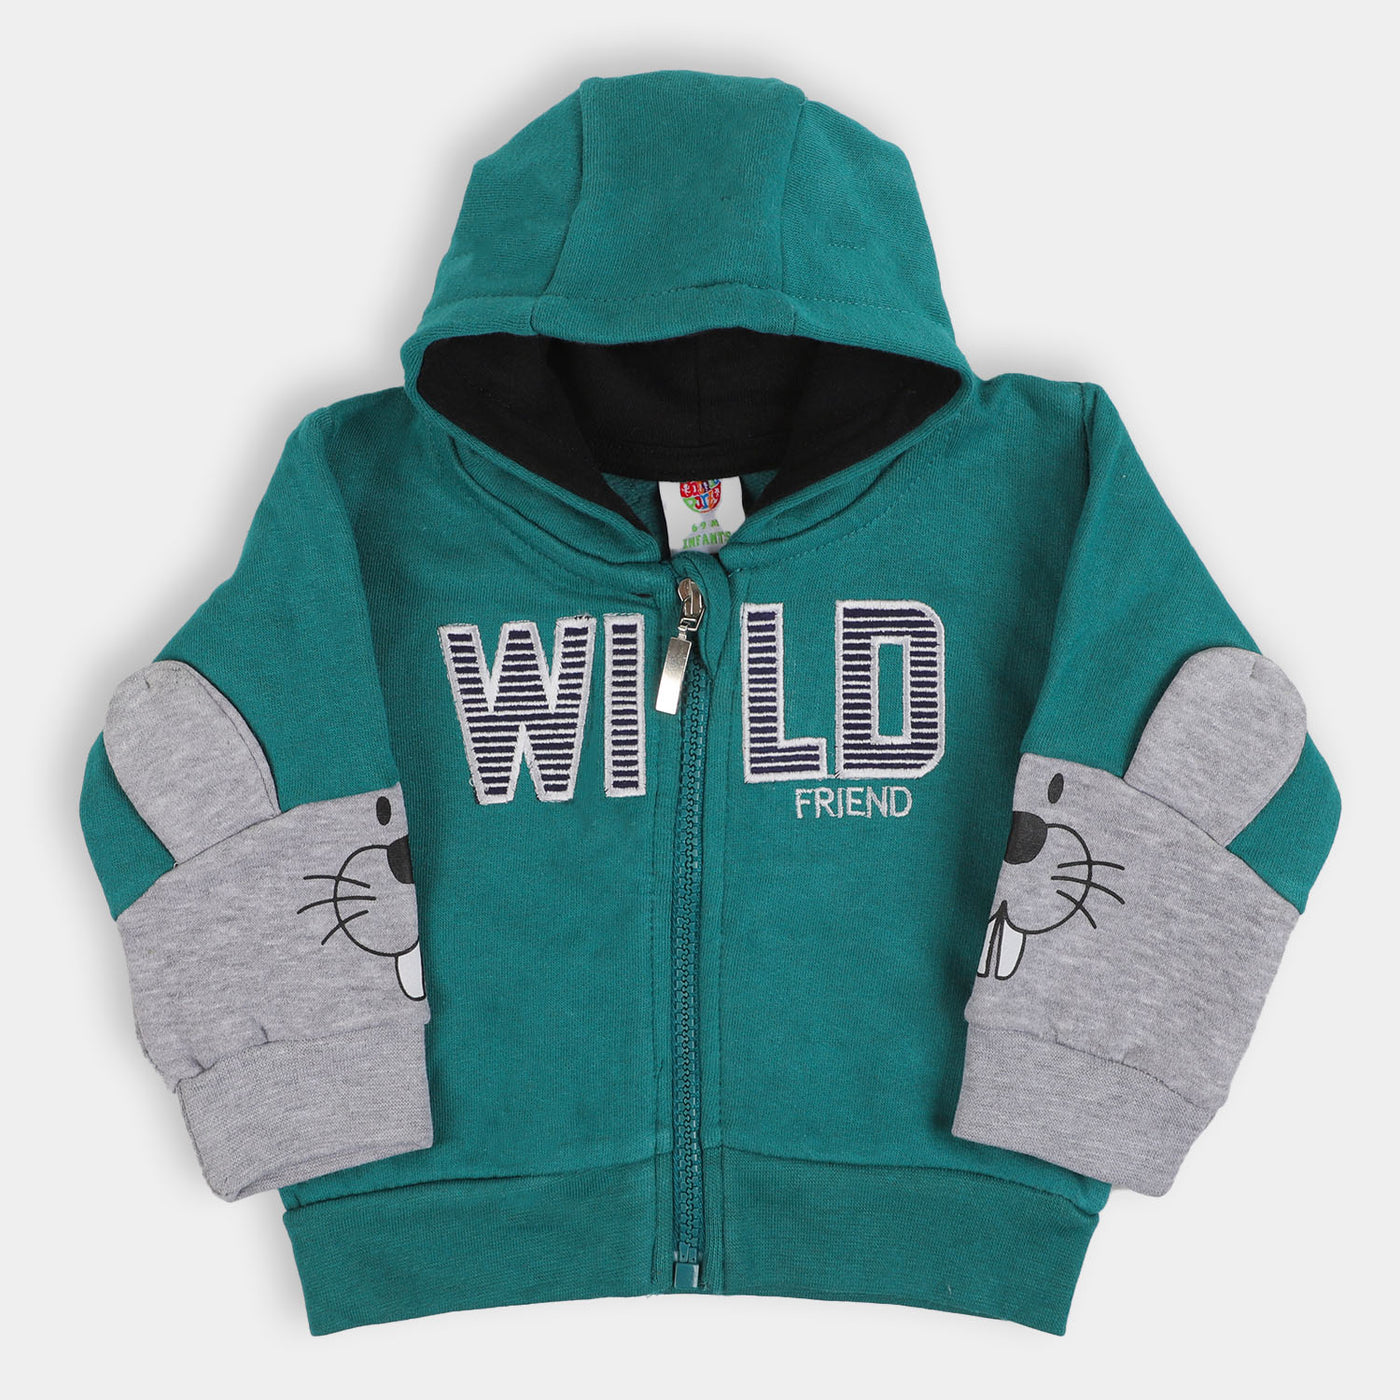 Infant Boys Hooded Knitted Jacket Wild - Green